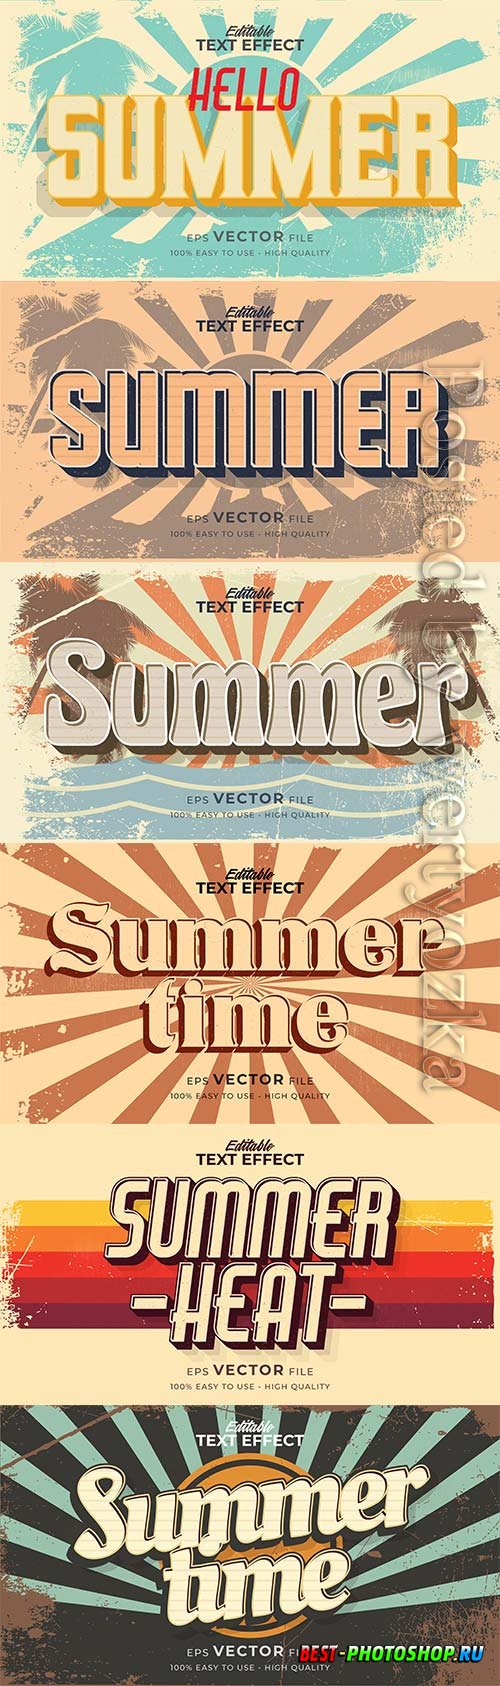 Text style effect, retro summer text in grunge style vol 2